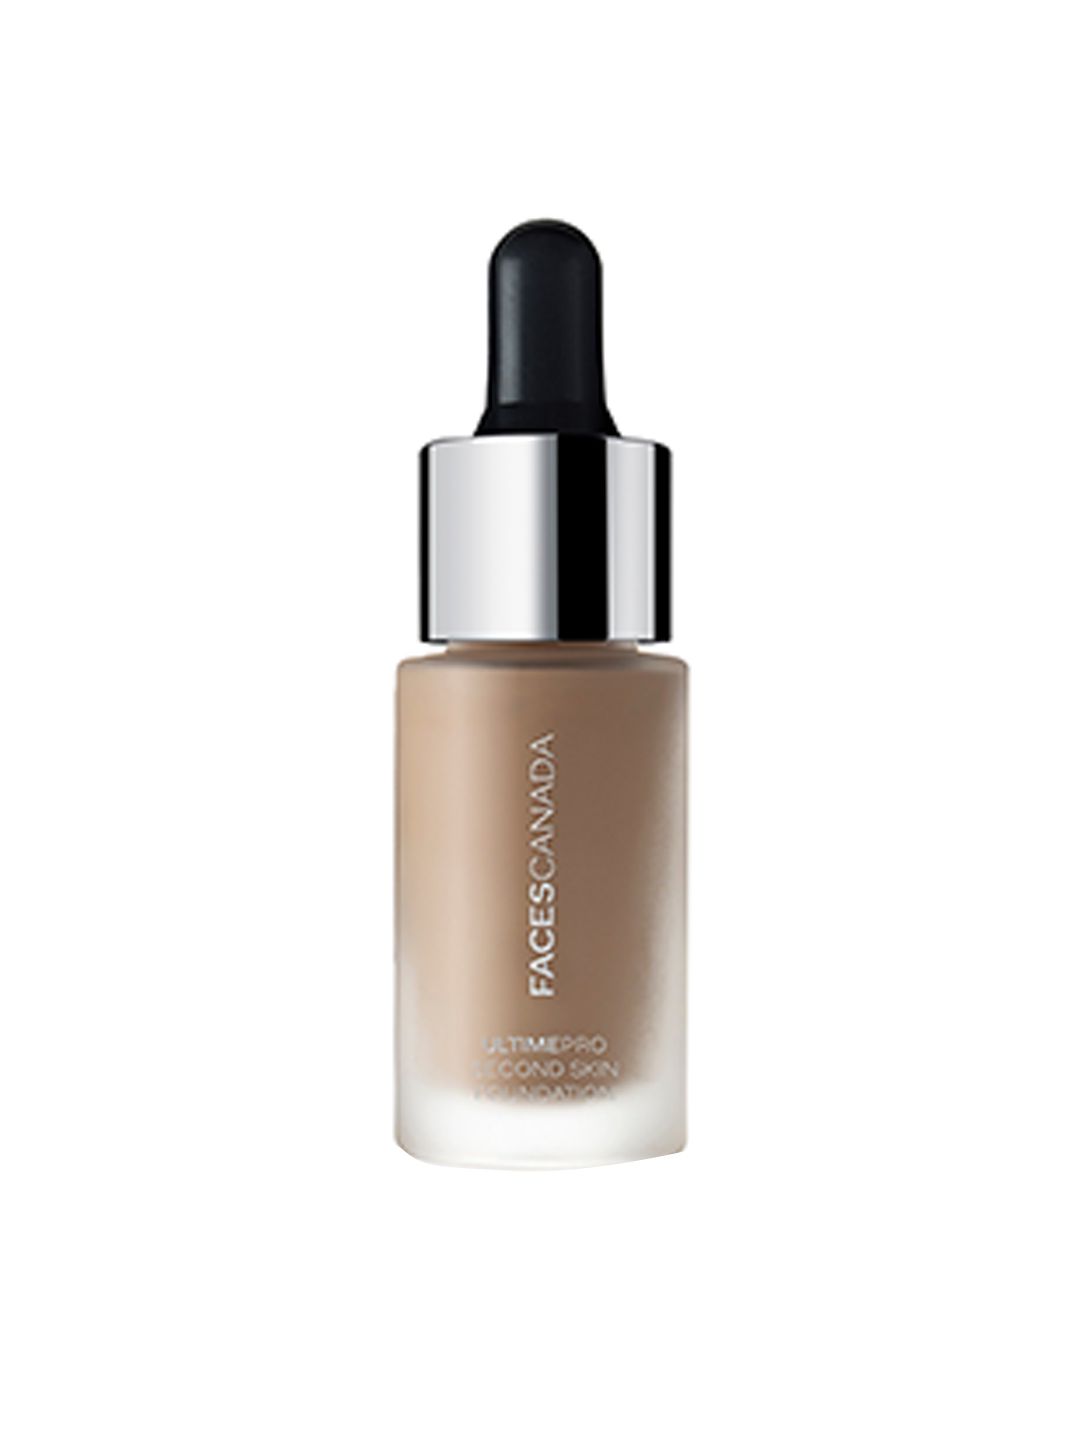 FACES CANADA UltimePro Second Skin Foundation Beige 03 - 15 ml Price in India